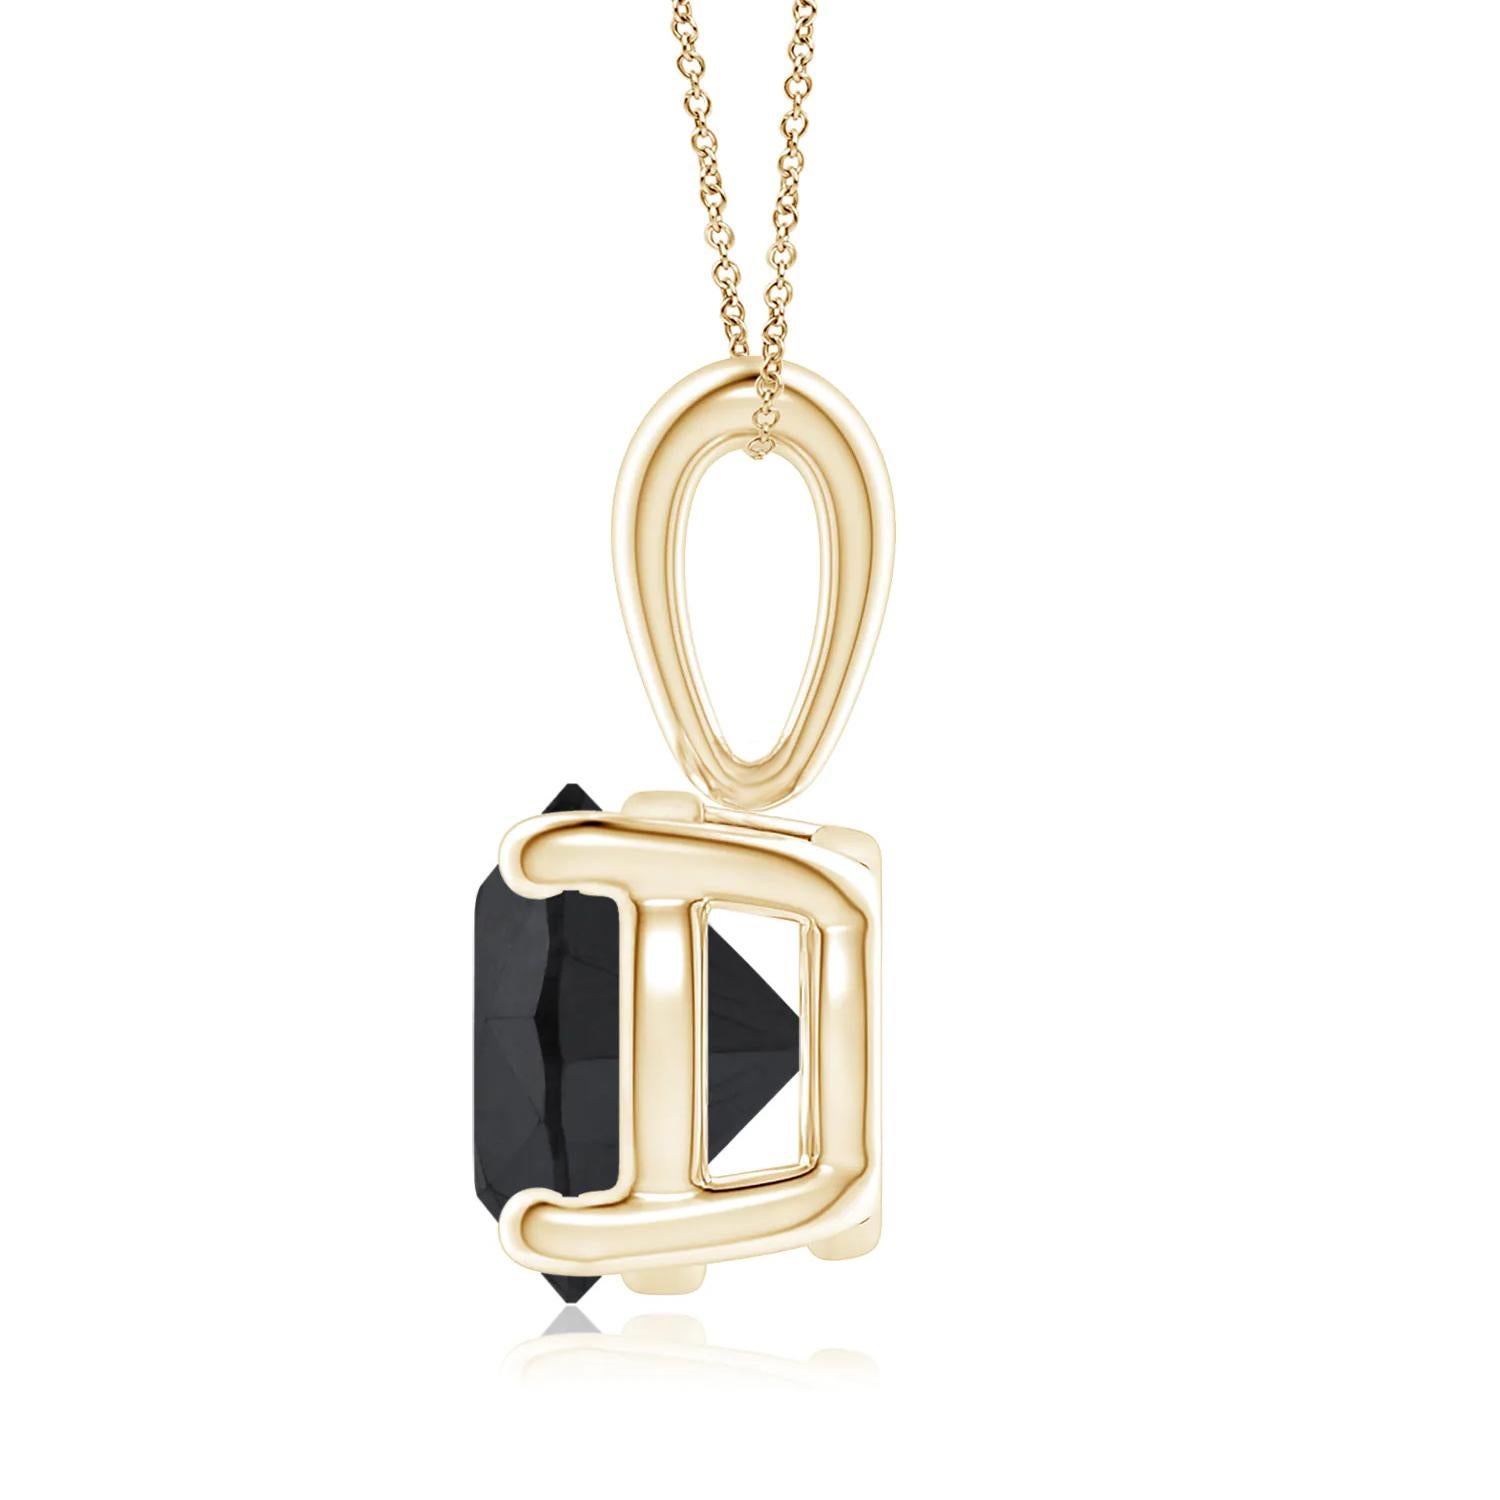 Round Cut 3.15 Carat Round Black Diamond Solitaire Pendant Necklace in 14K Yellow Gold